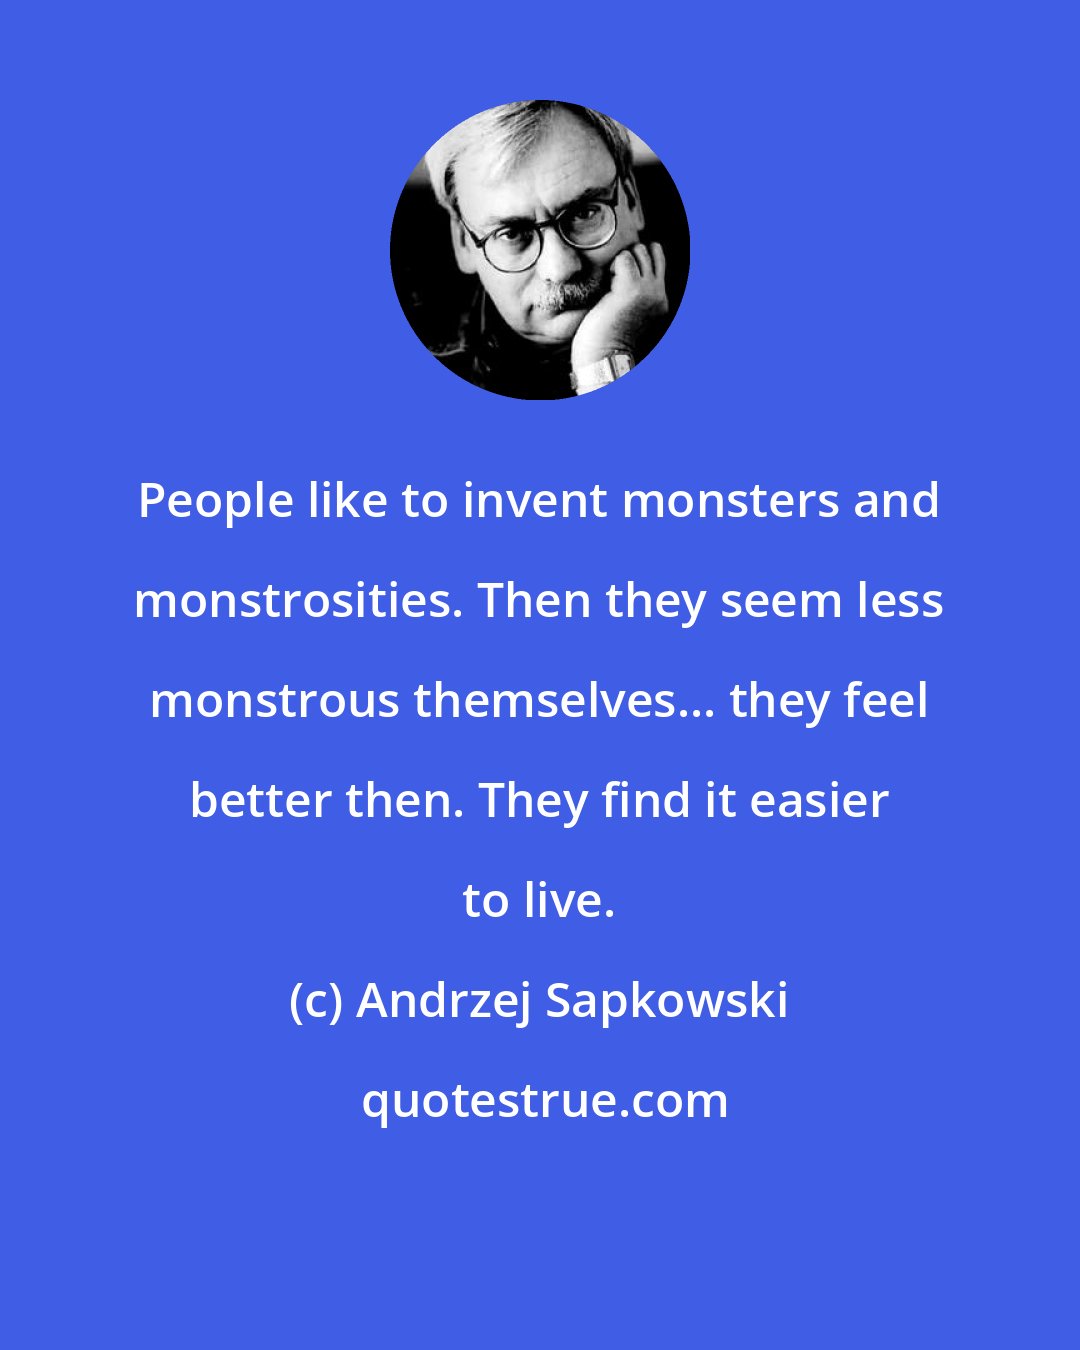 Andrzej Sapkowski: People like to invent monsters and monstrosities. Then they seem less monstrous themselves... they feel better then. They find it easier to live.